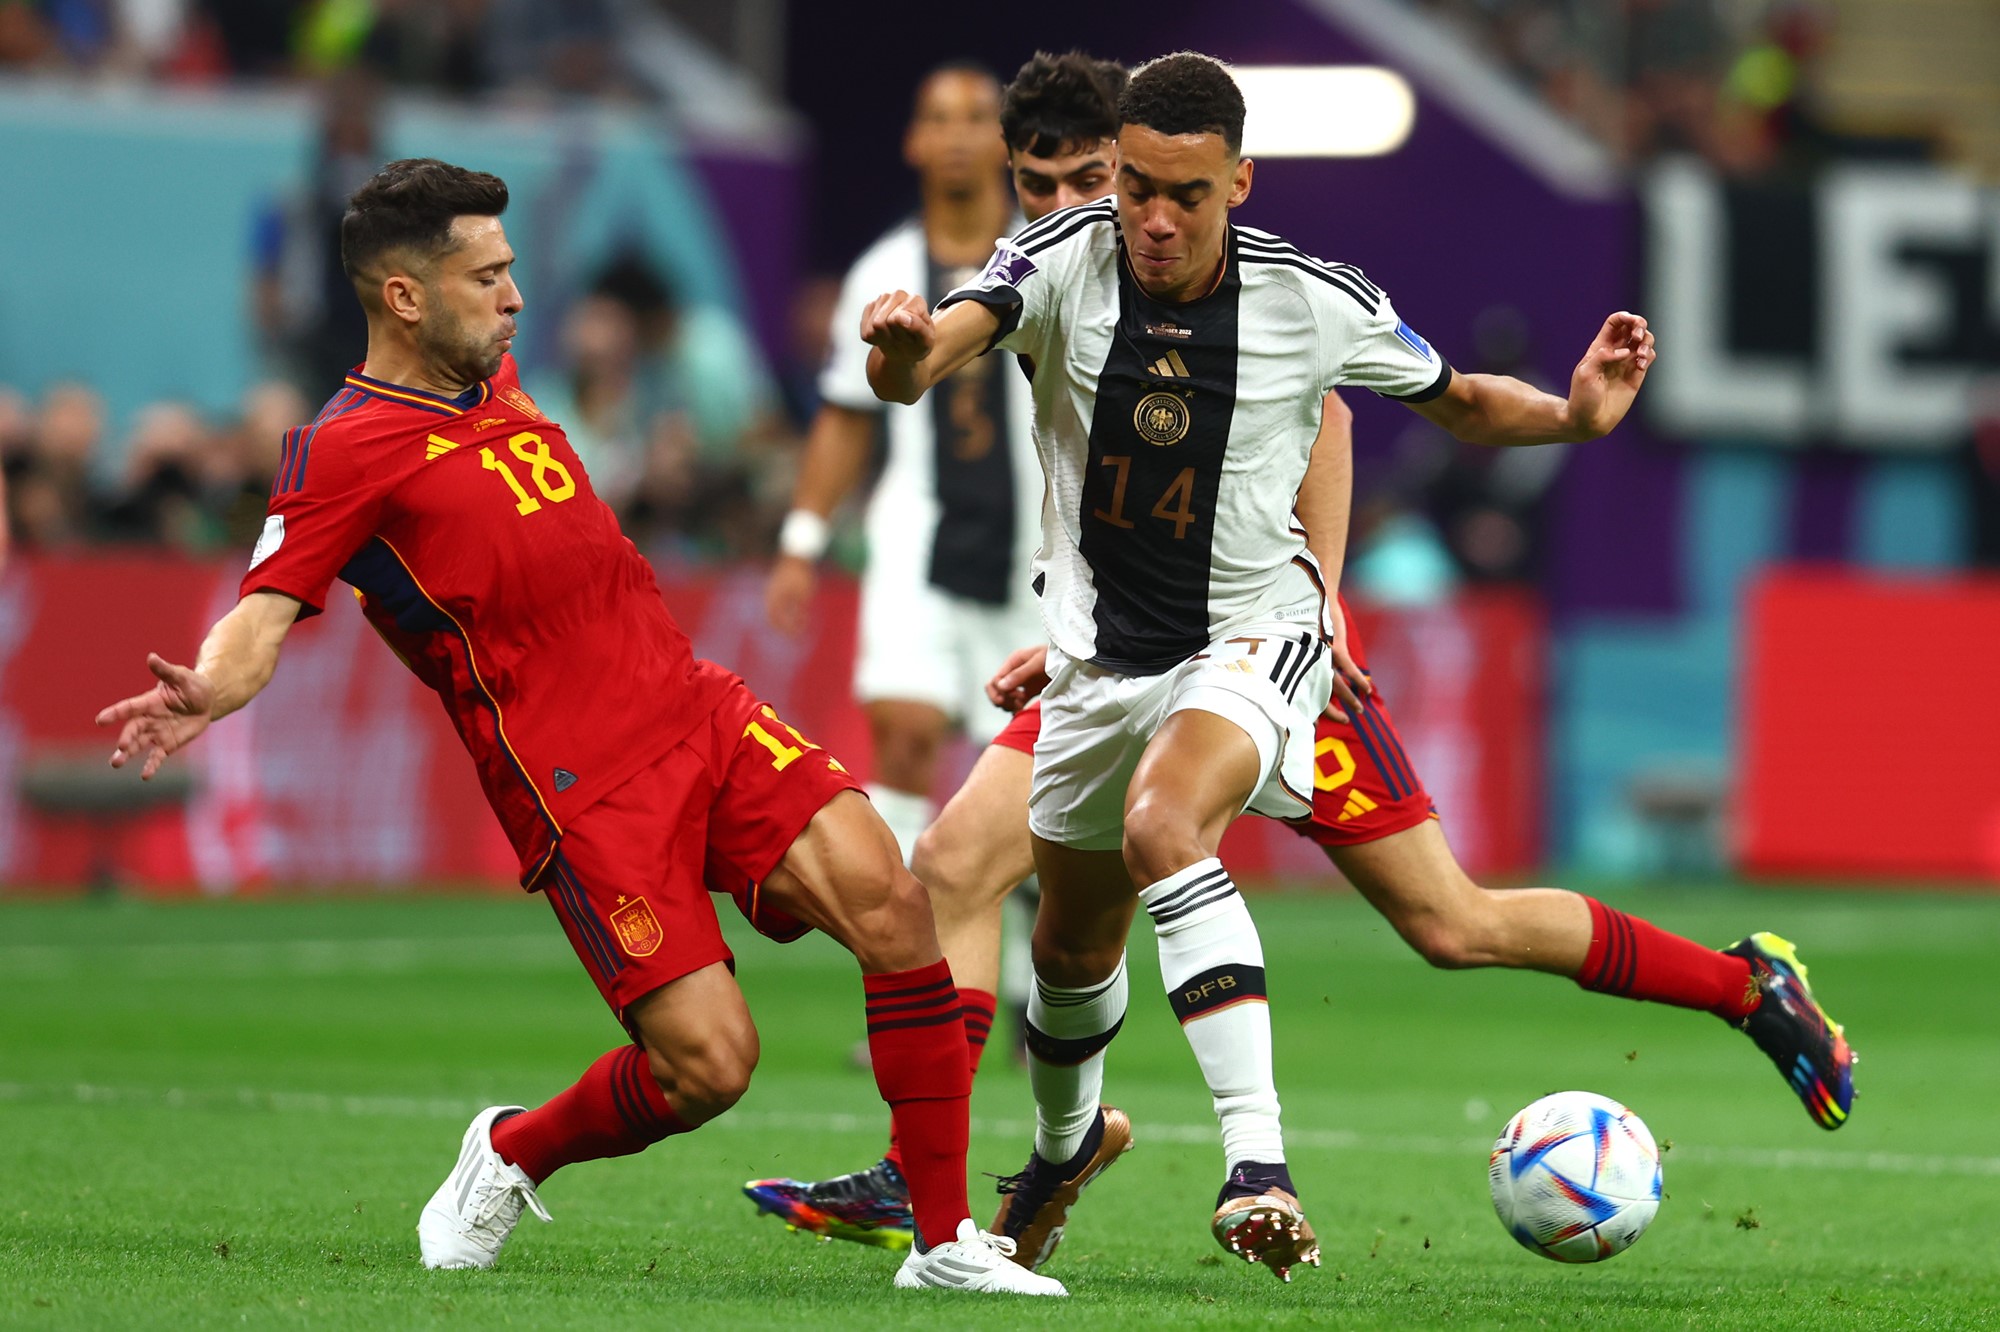 Spaniard Jordi Alba competes for the ball with Germany's Jamal Musiala.